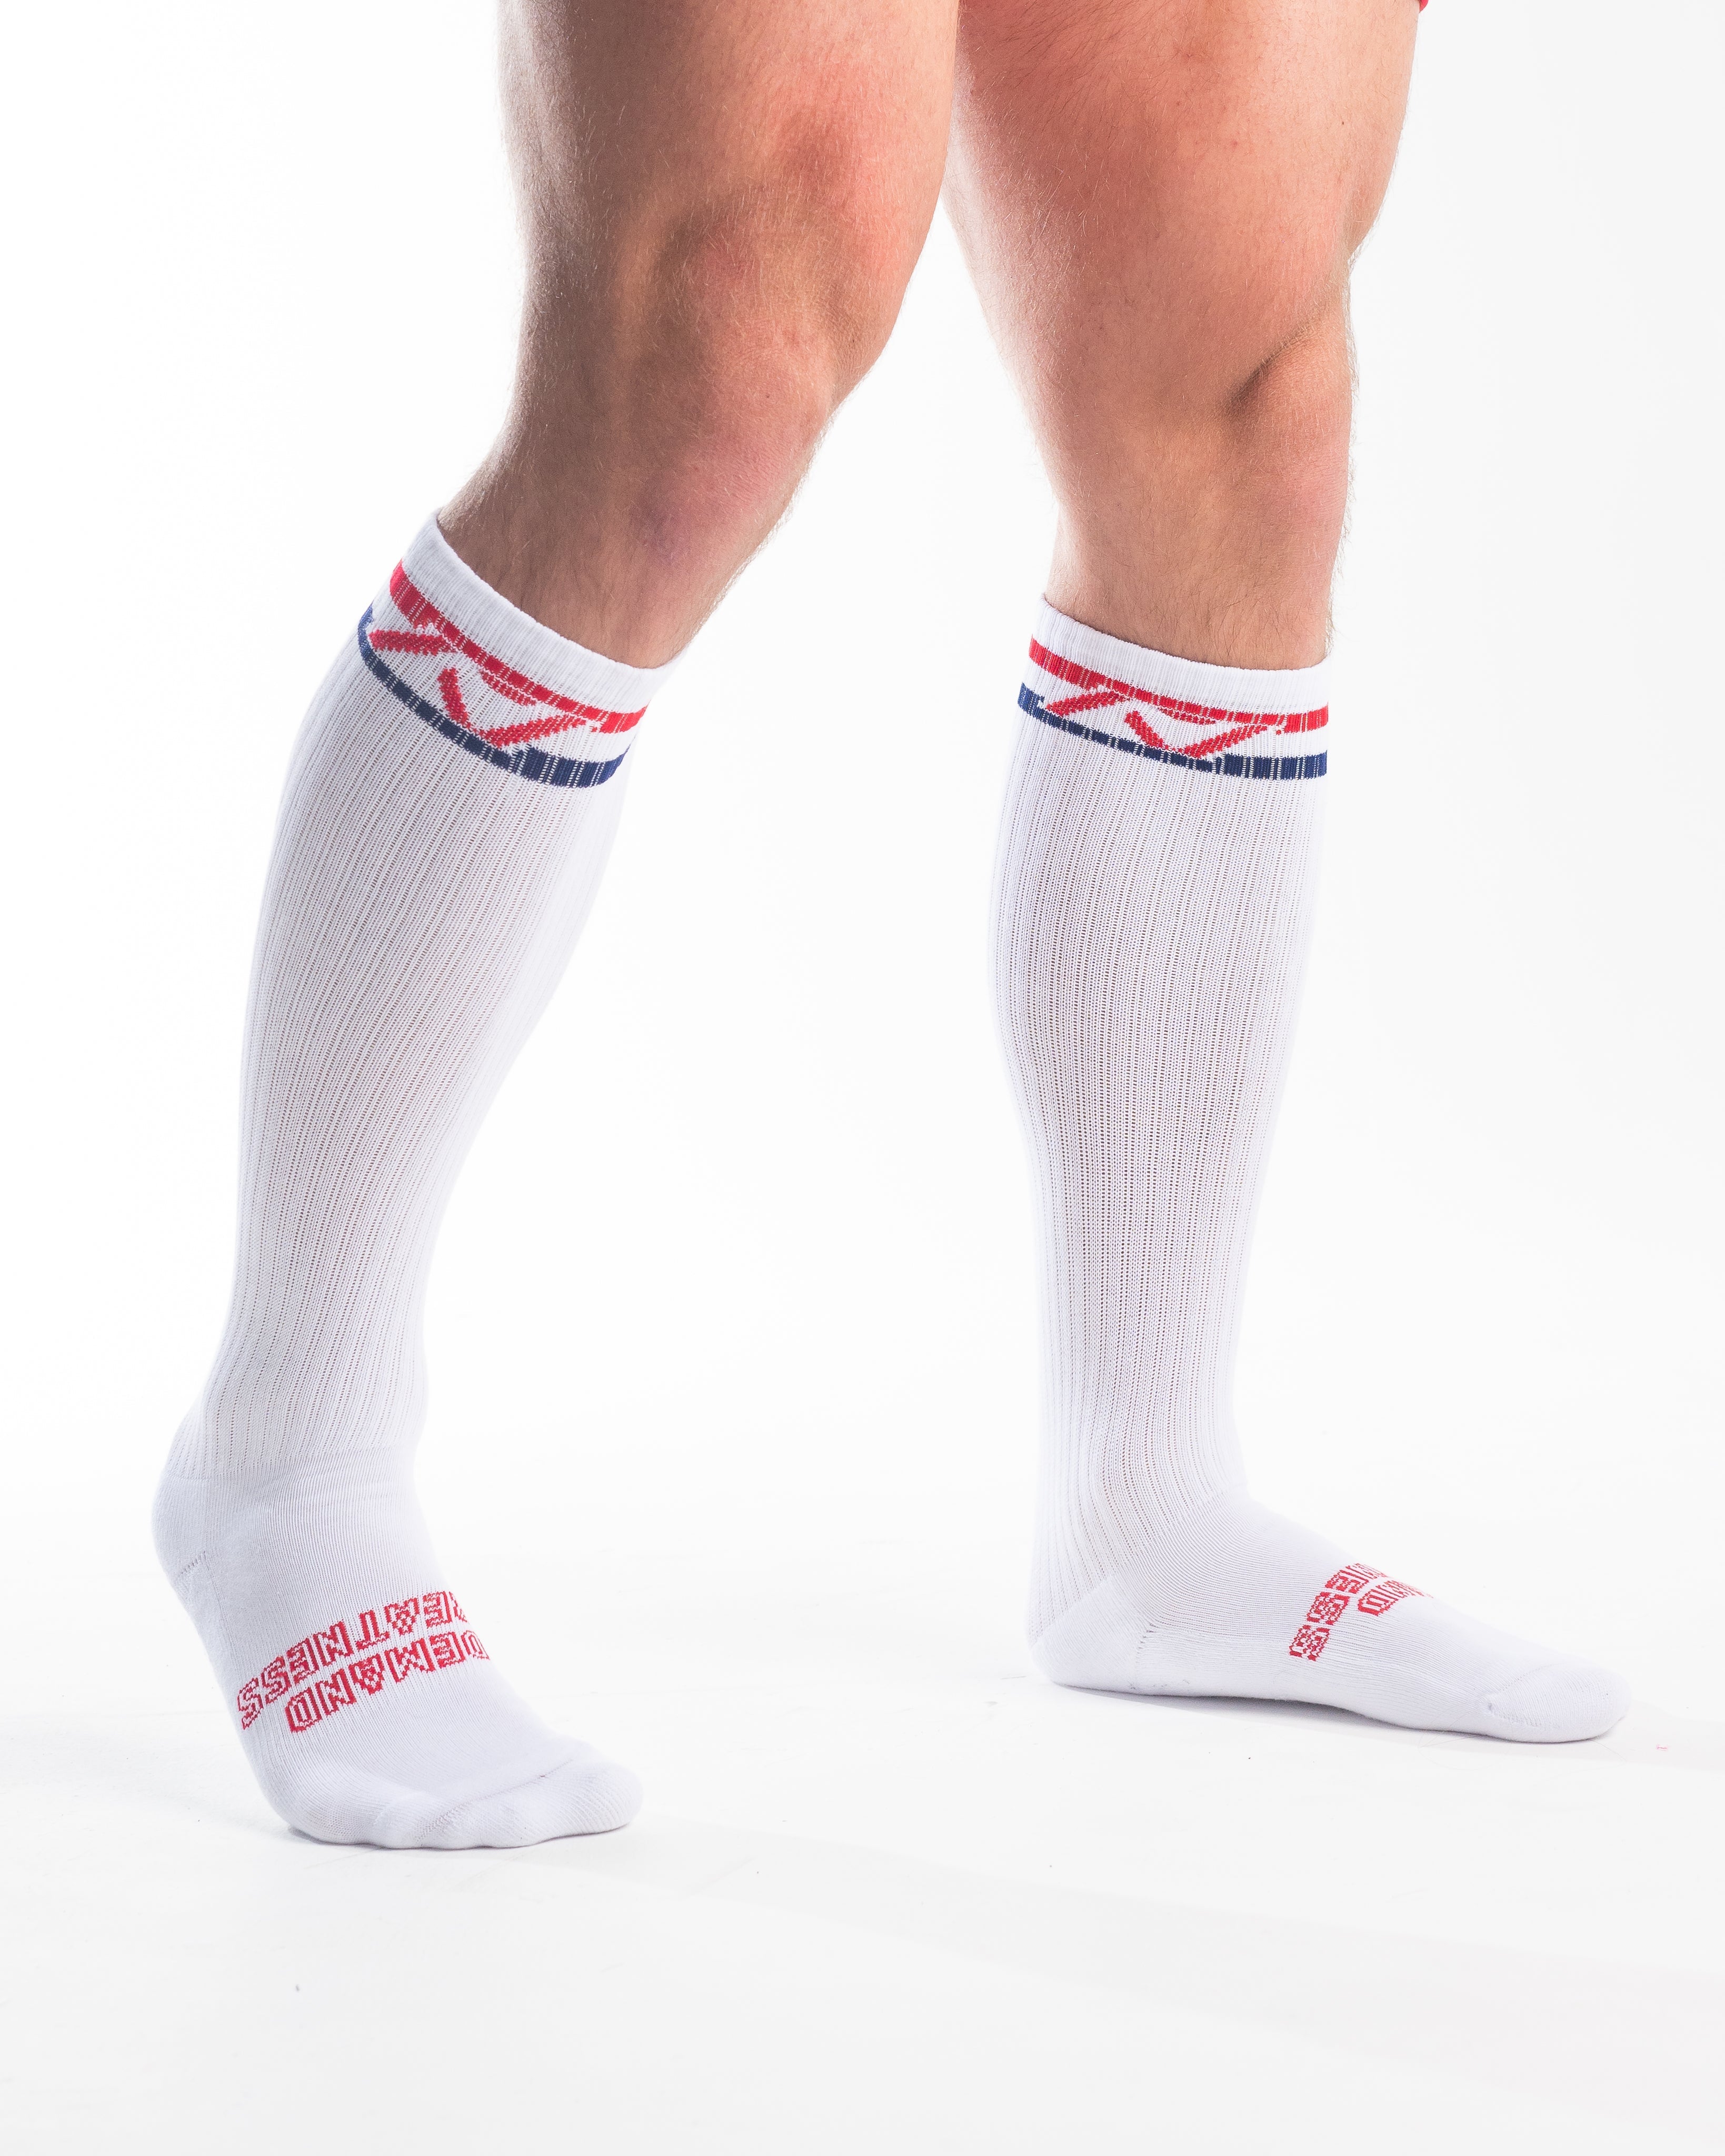 A7 RWB Deadlift socks are designed specifically for pulls and keep your shins protected from scrapes. A7 deadlift socks are a perfect pair to wear in training or powerlifting competition. The IPF Approved Kit includes Powerlifting Singlet, A7 Meet Shirt, A7 Zebra Wrist Wraps, A7 Deadlift Socks, Hourglass Knee Sleeves (Stiff Knee Sleeves and Rigor Mortis Knee Sleeves). Genouillères powerlifting shipping to France, Spain, Ireland, Germany, Italy, Sweden and EU.